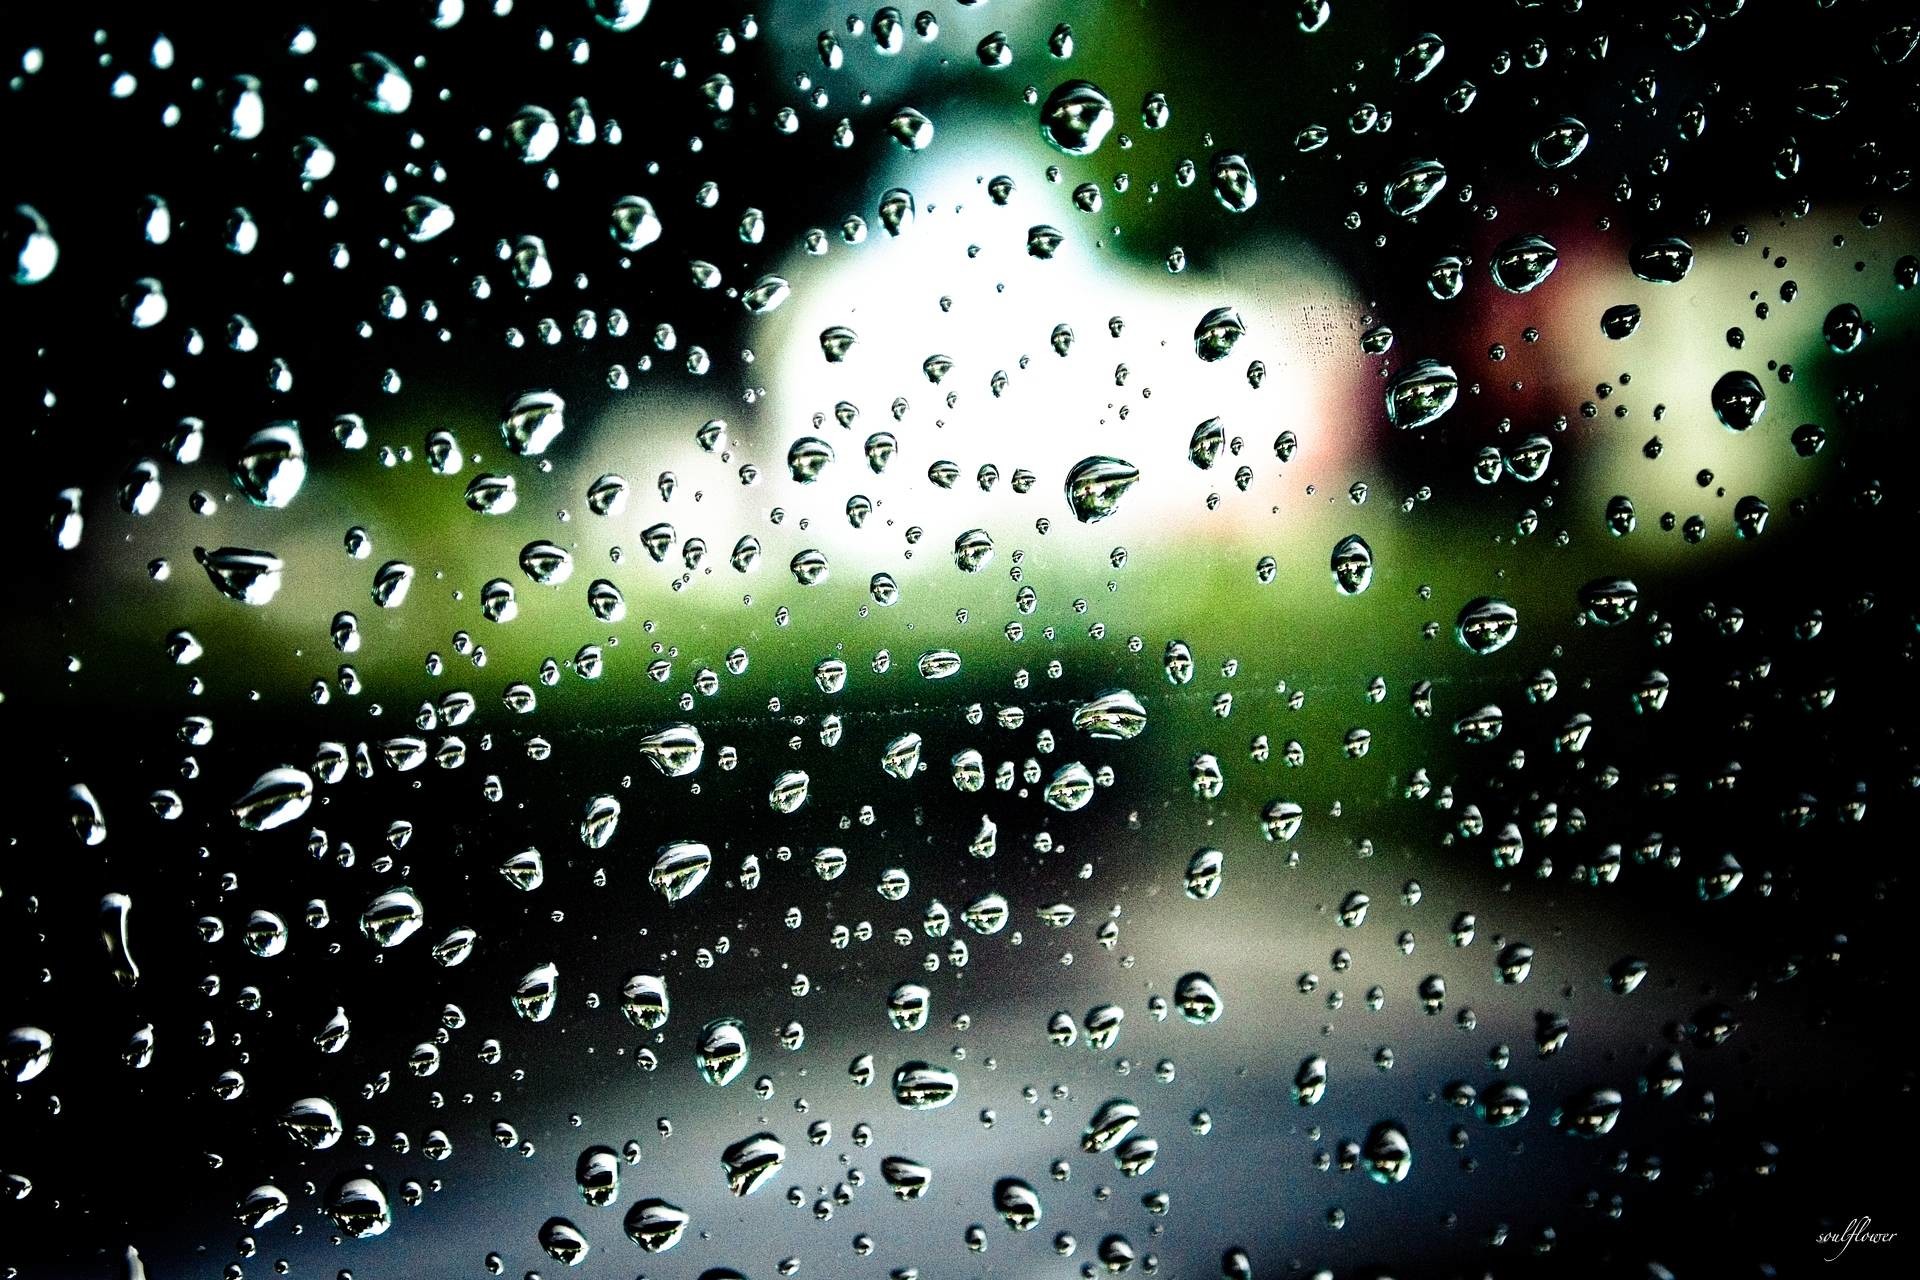 1920x1280 Raindrops on window wallpapers and images - wallpapers, pictures .